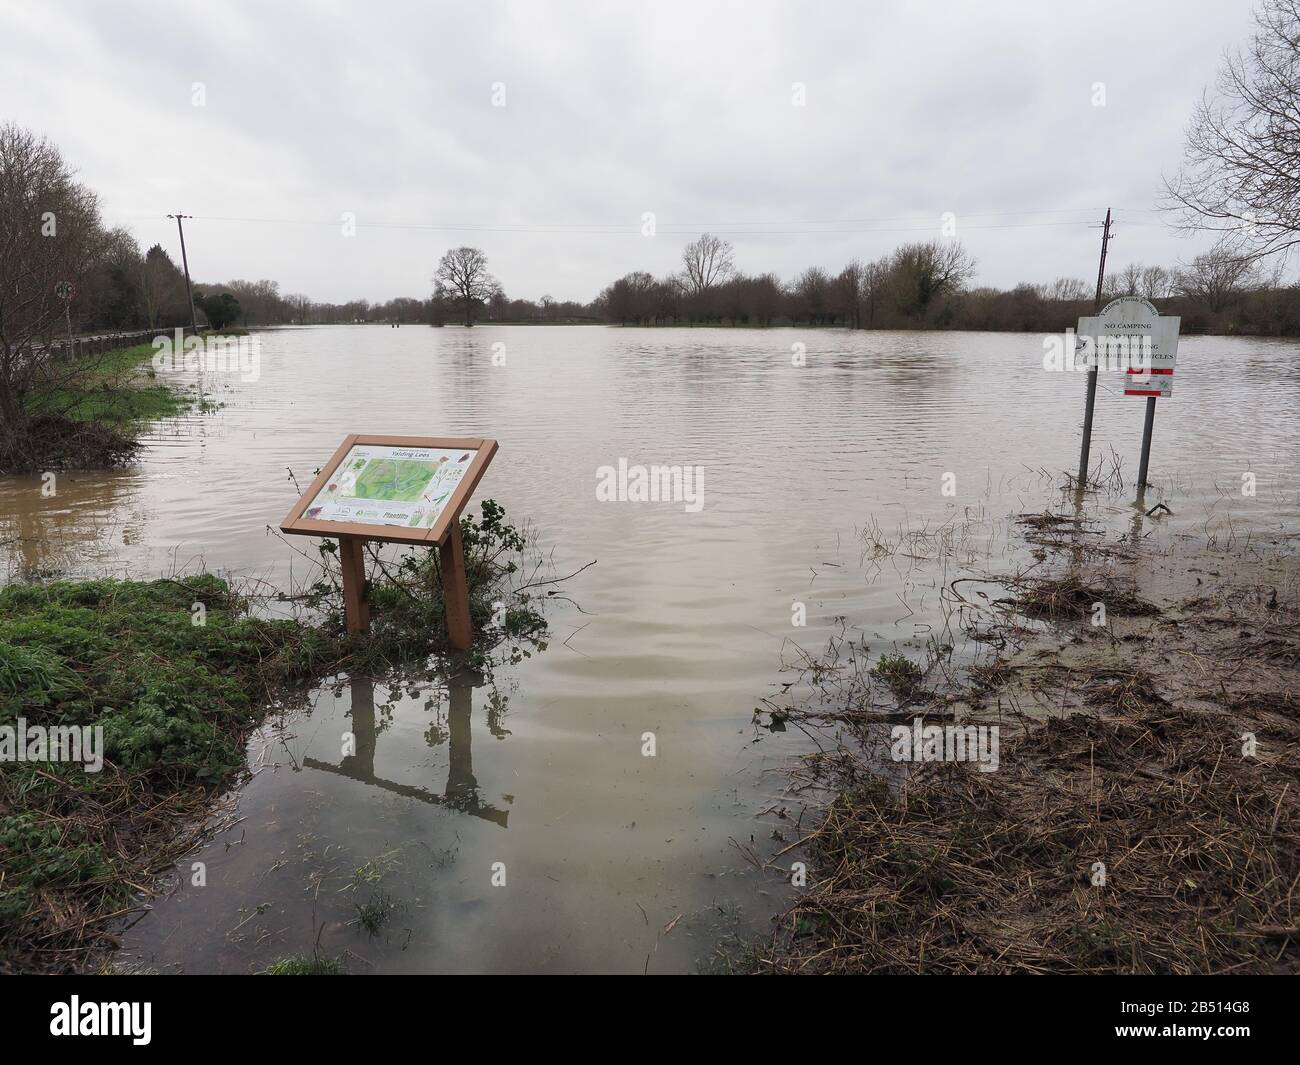 Yalding, Kent, UK. 7th Mar, 2020. Flooding in the village of Yalding, Kent.  Signboards at the entrance to the village park Yalding Lees, which was  almost entirely underwater. Credit: James Bell/Alamy Live